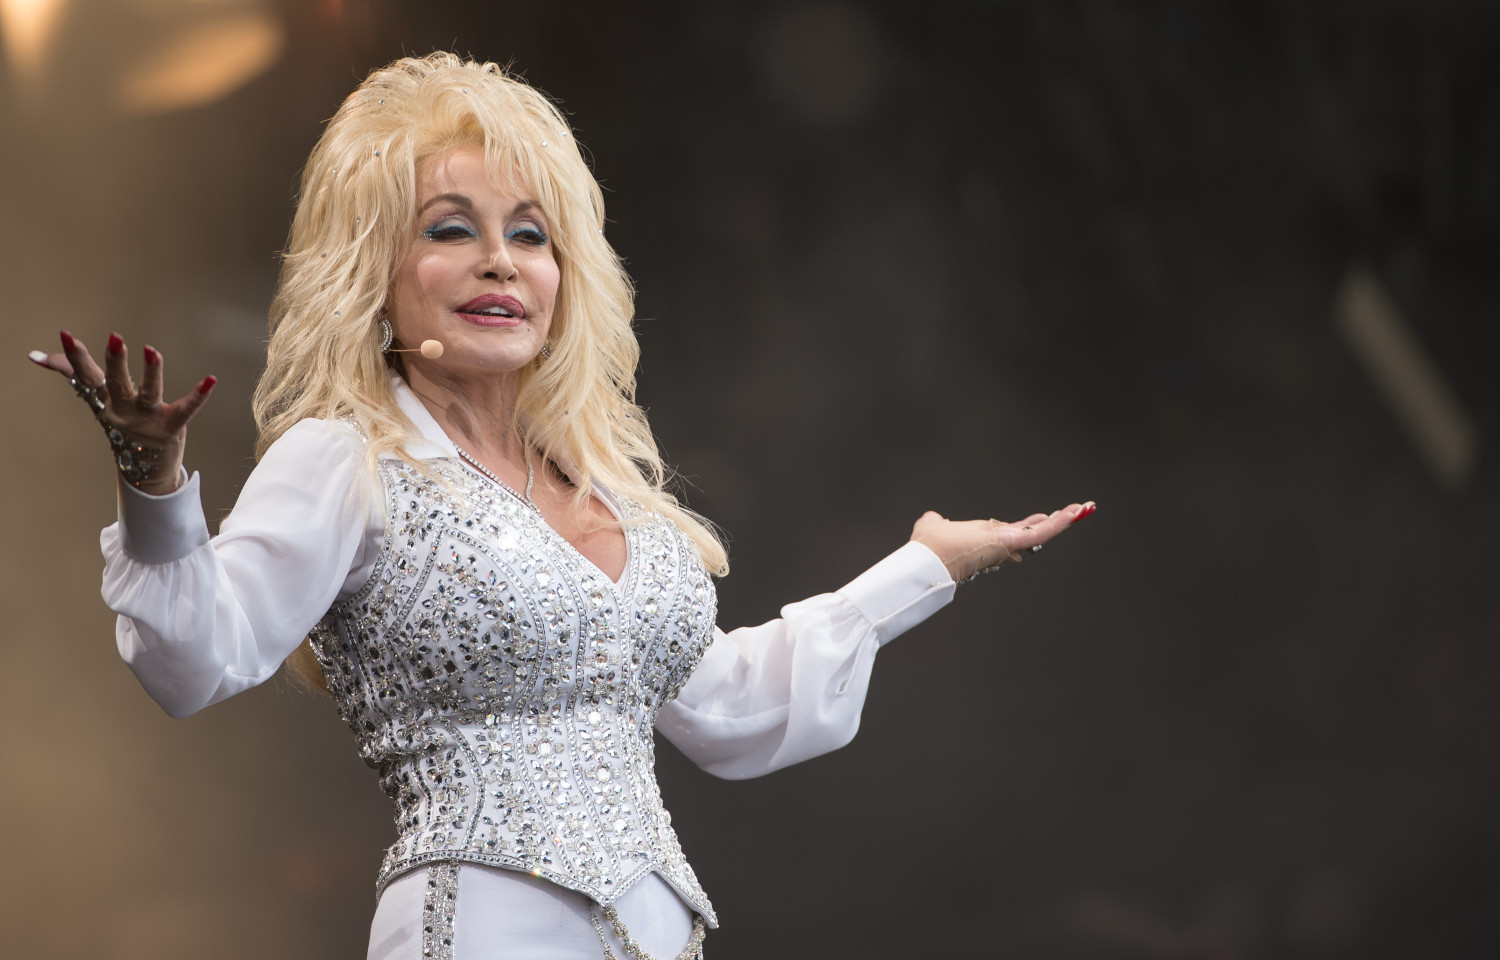 Dolly Parton tells Christians to stop judging gay people